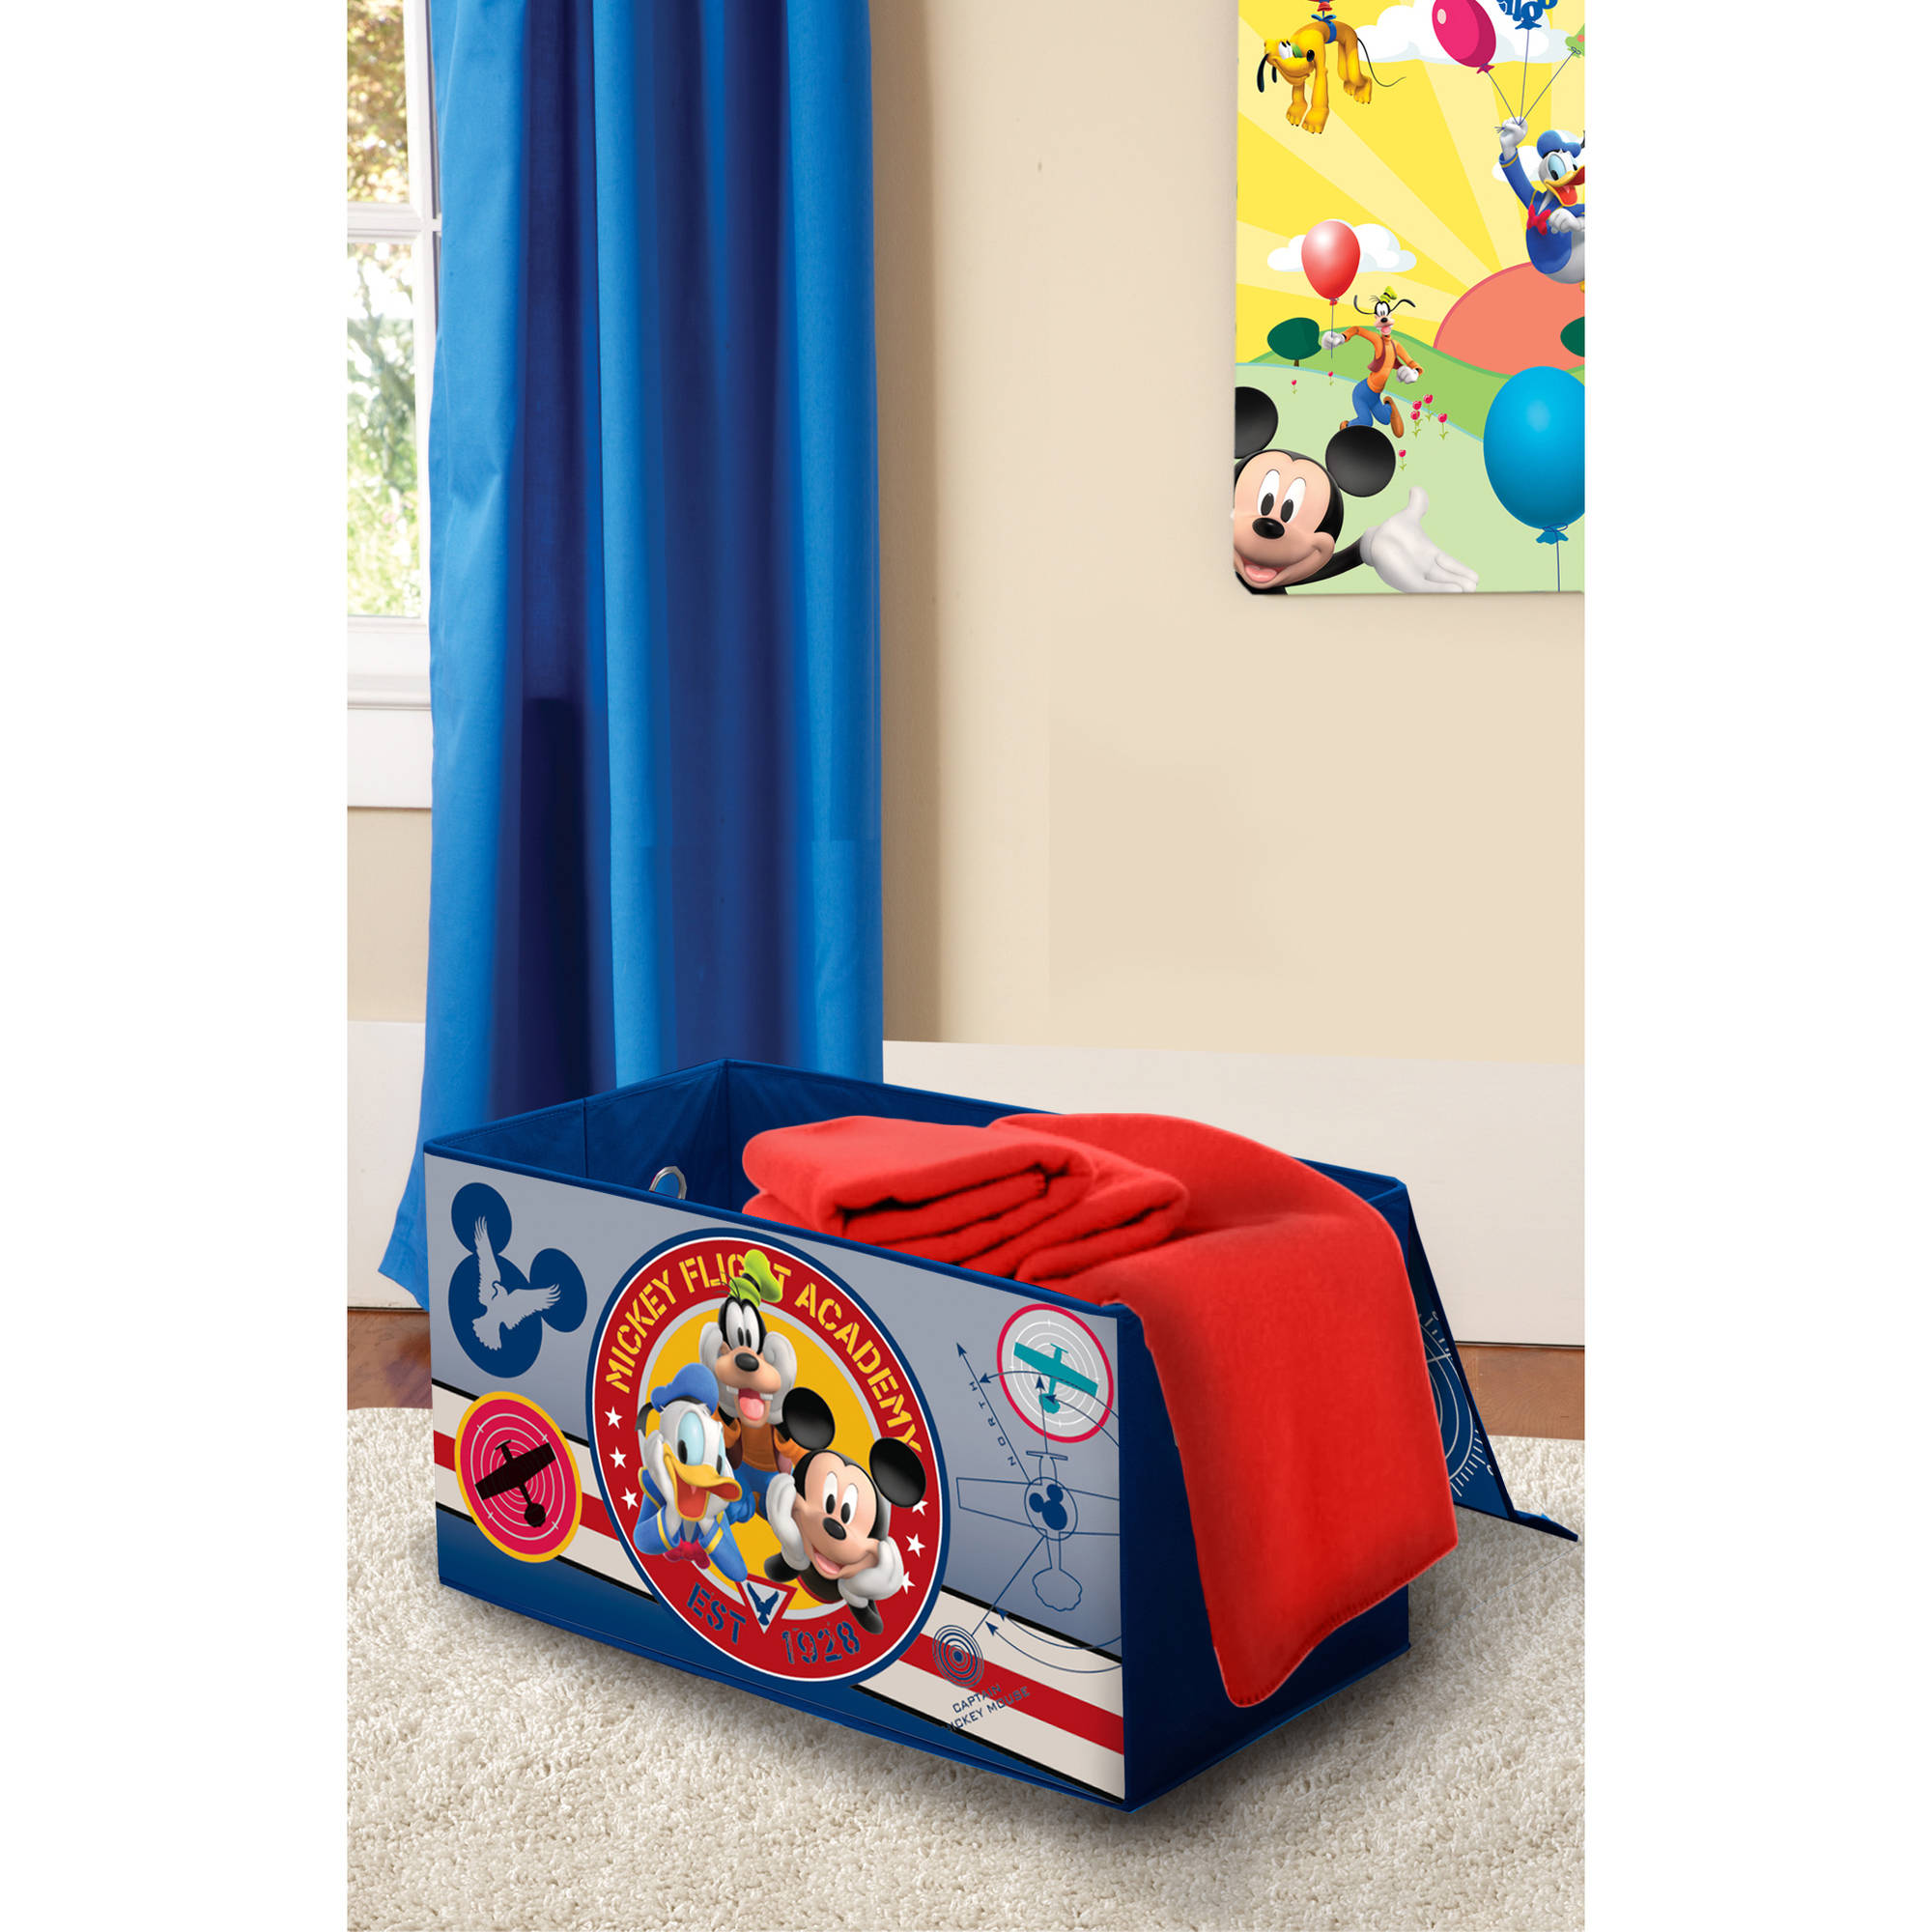 Disney Mickey Mouse Oversized Soft Collapsible Storage Toy Trunk - image 2 of 2